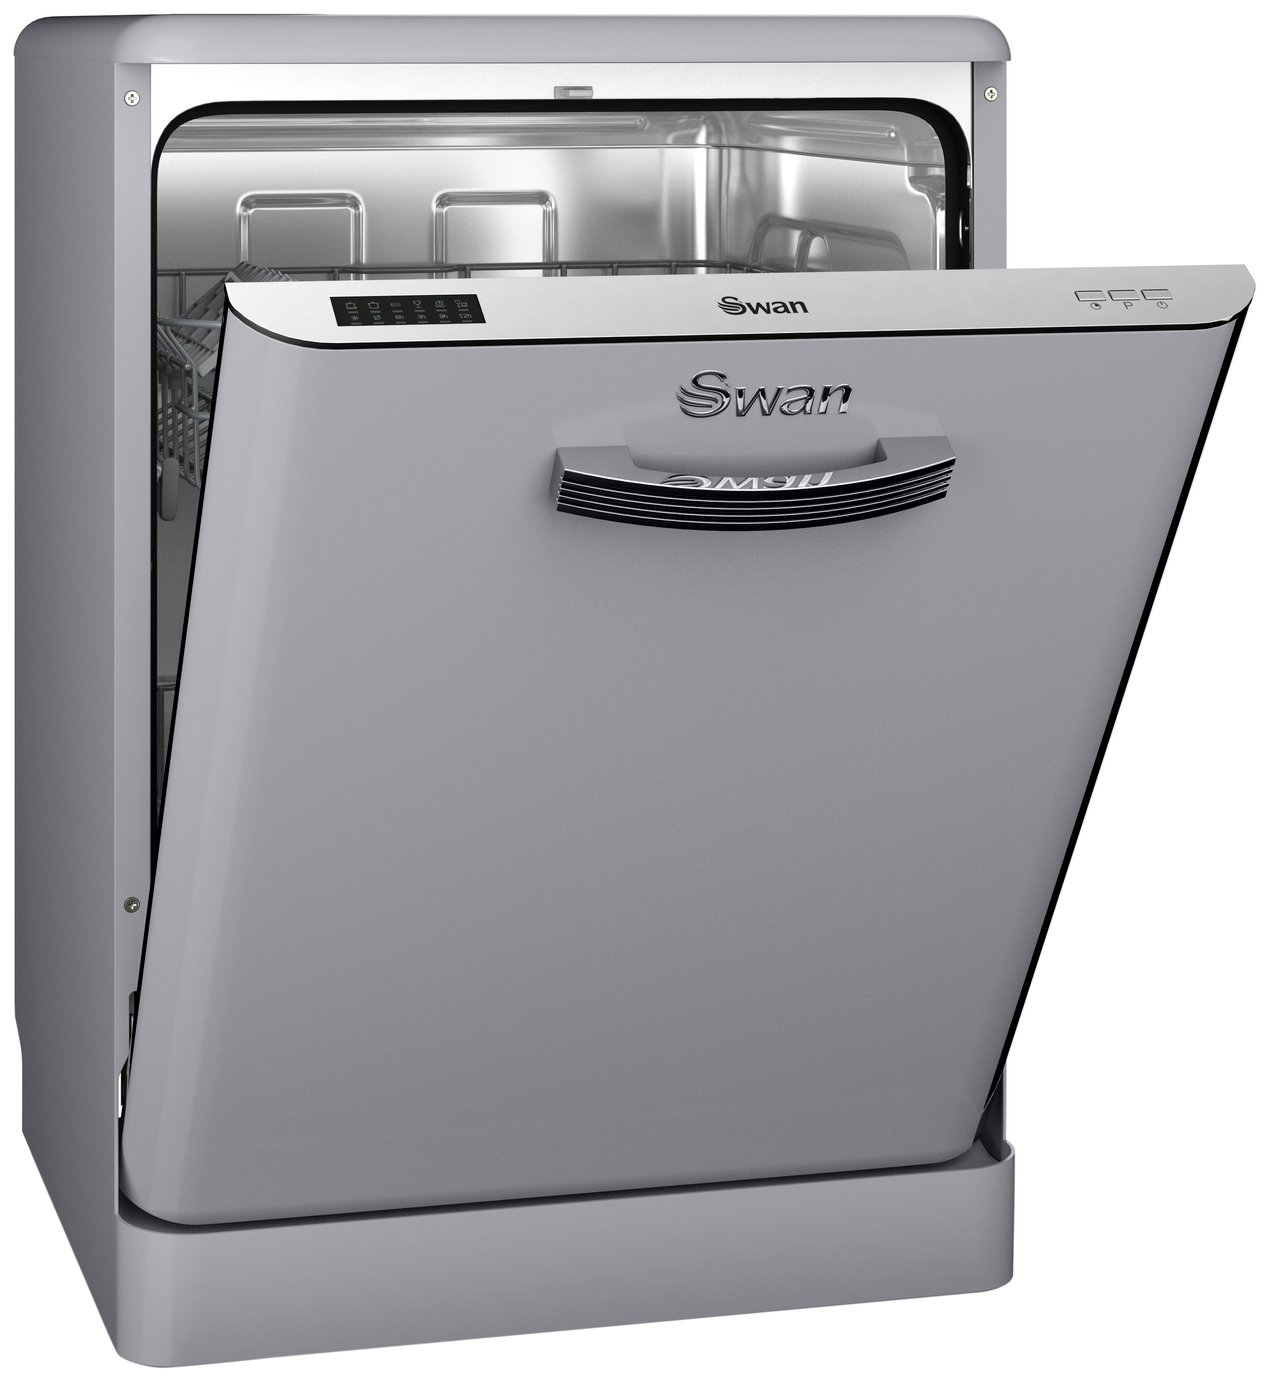 Swan SDW7040GRN Full Size Dishwasher review